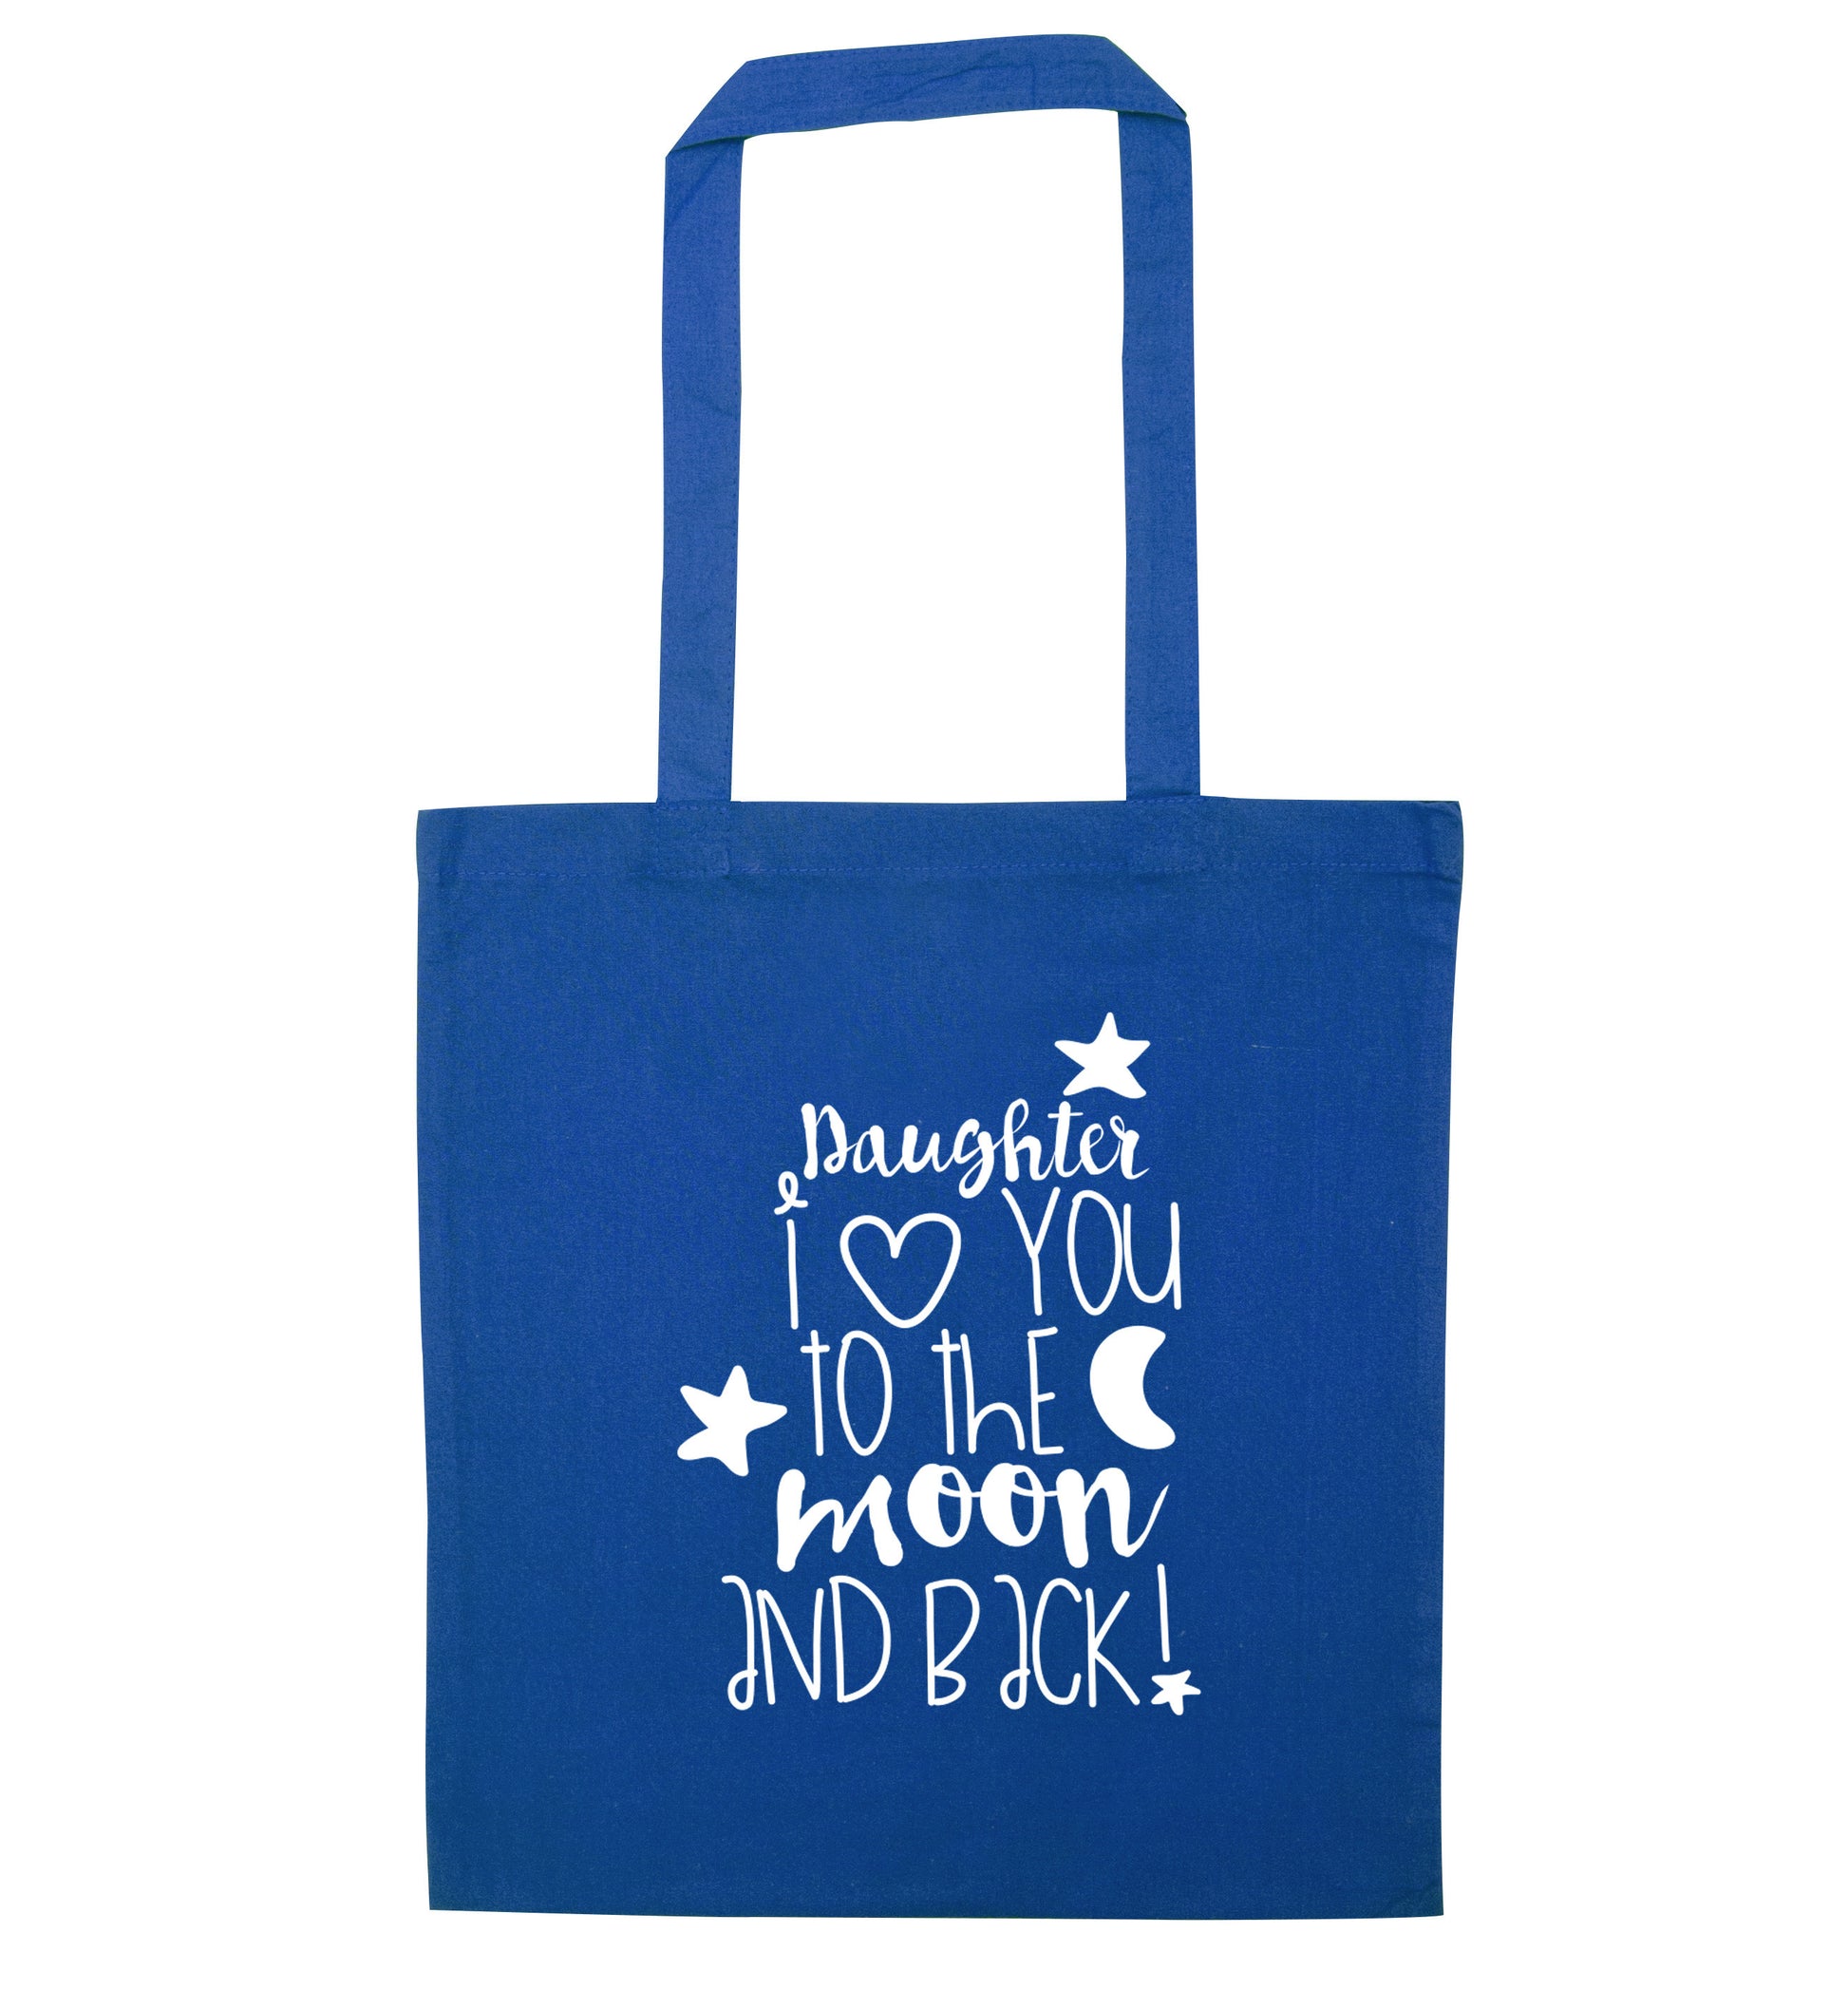 Daughter I love you to the moon and back blue tote bag